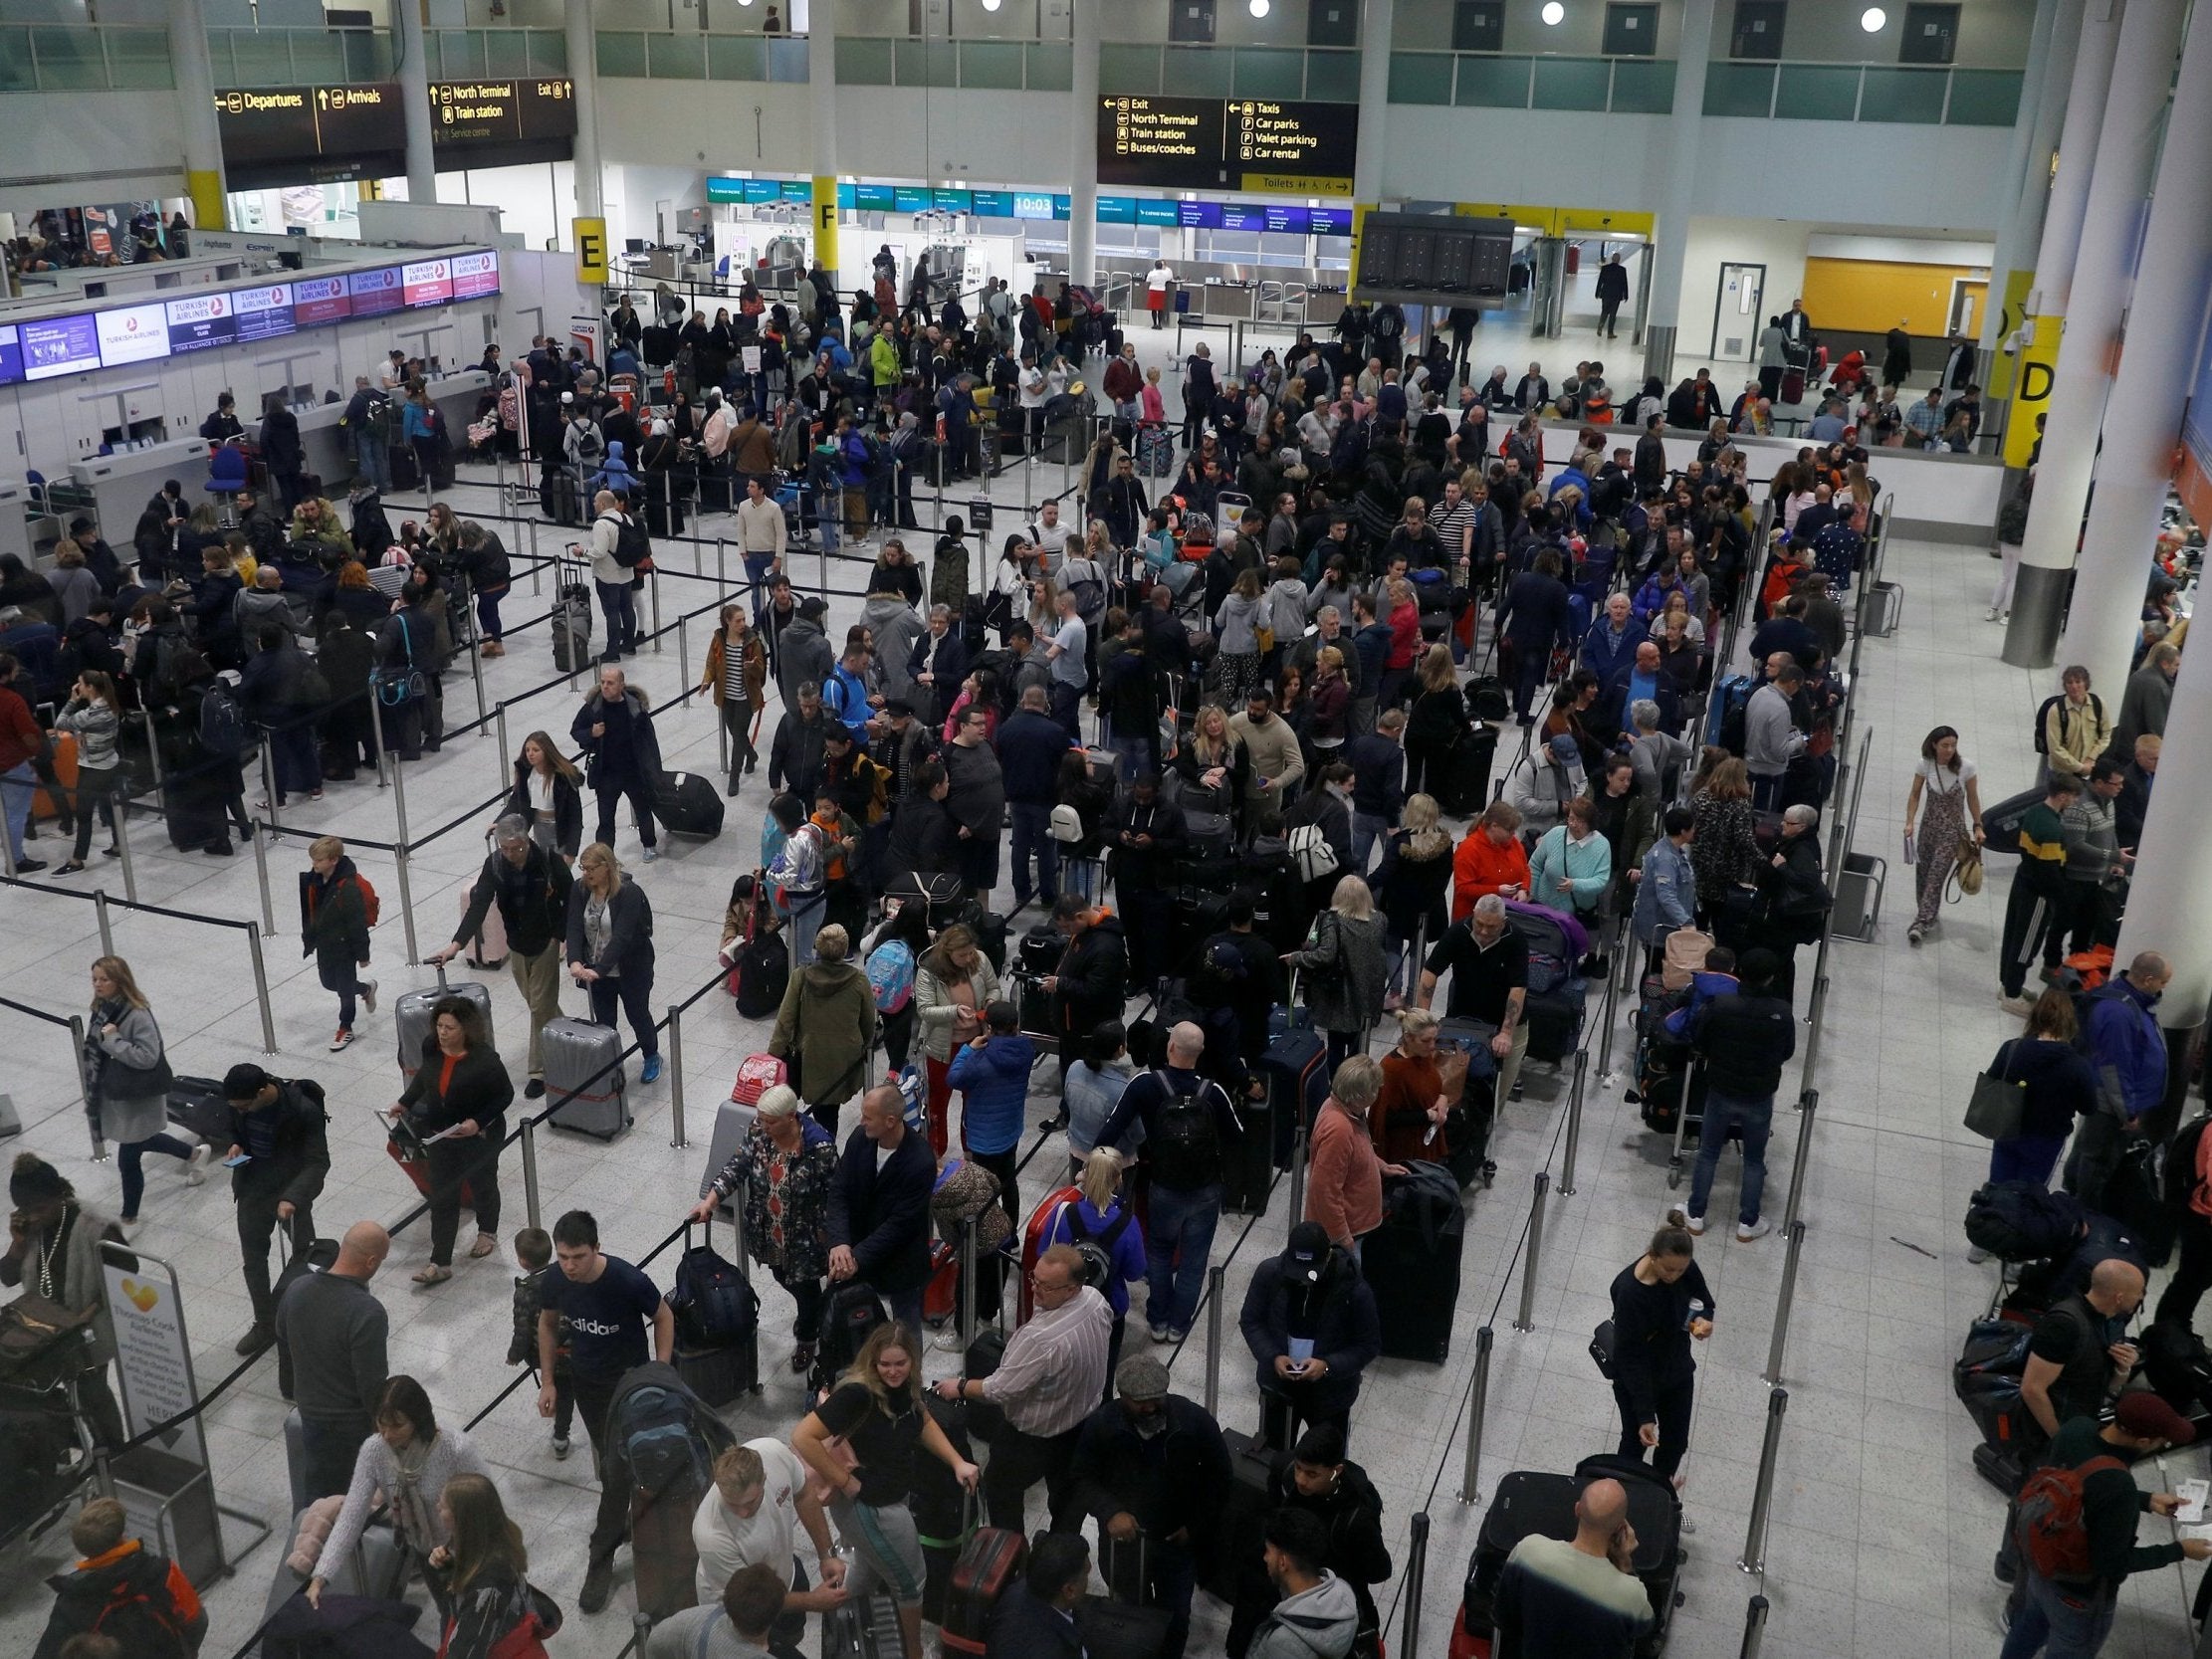 The airport saw a huge amount disruption due to a drone in its airspace